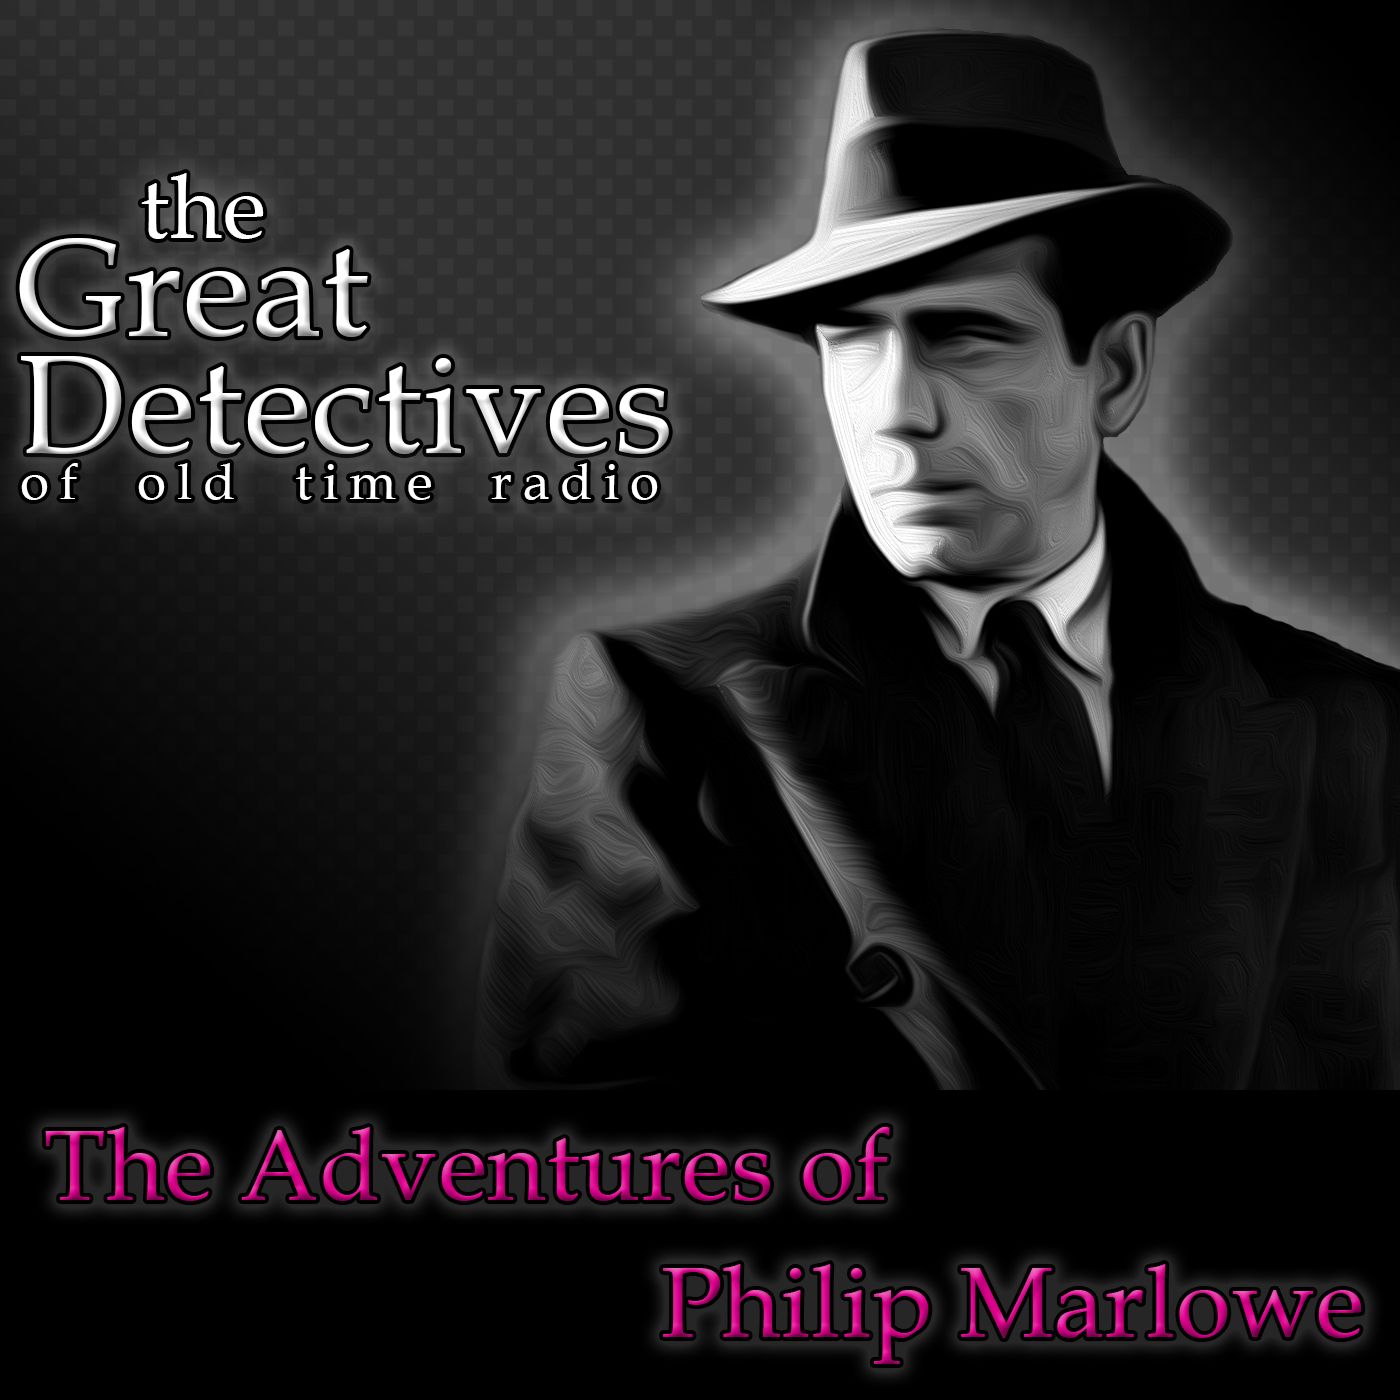 The Great Detectives Present Philip Marlowe (Old Time Radio)